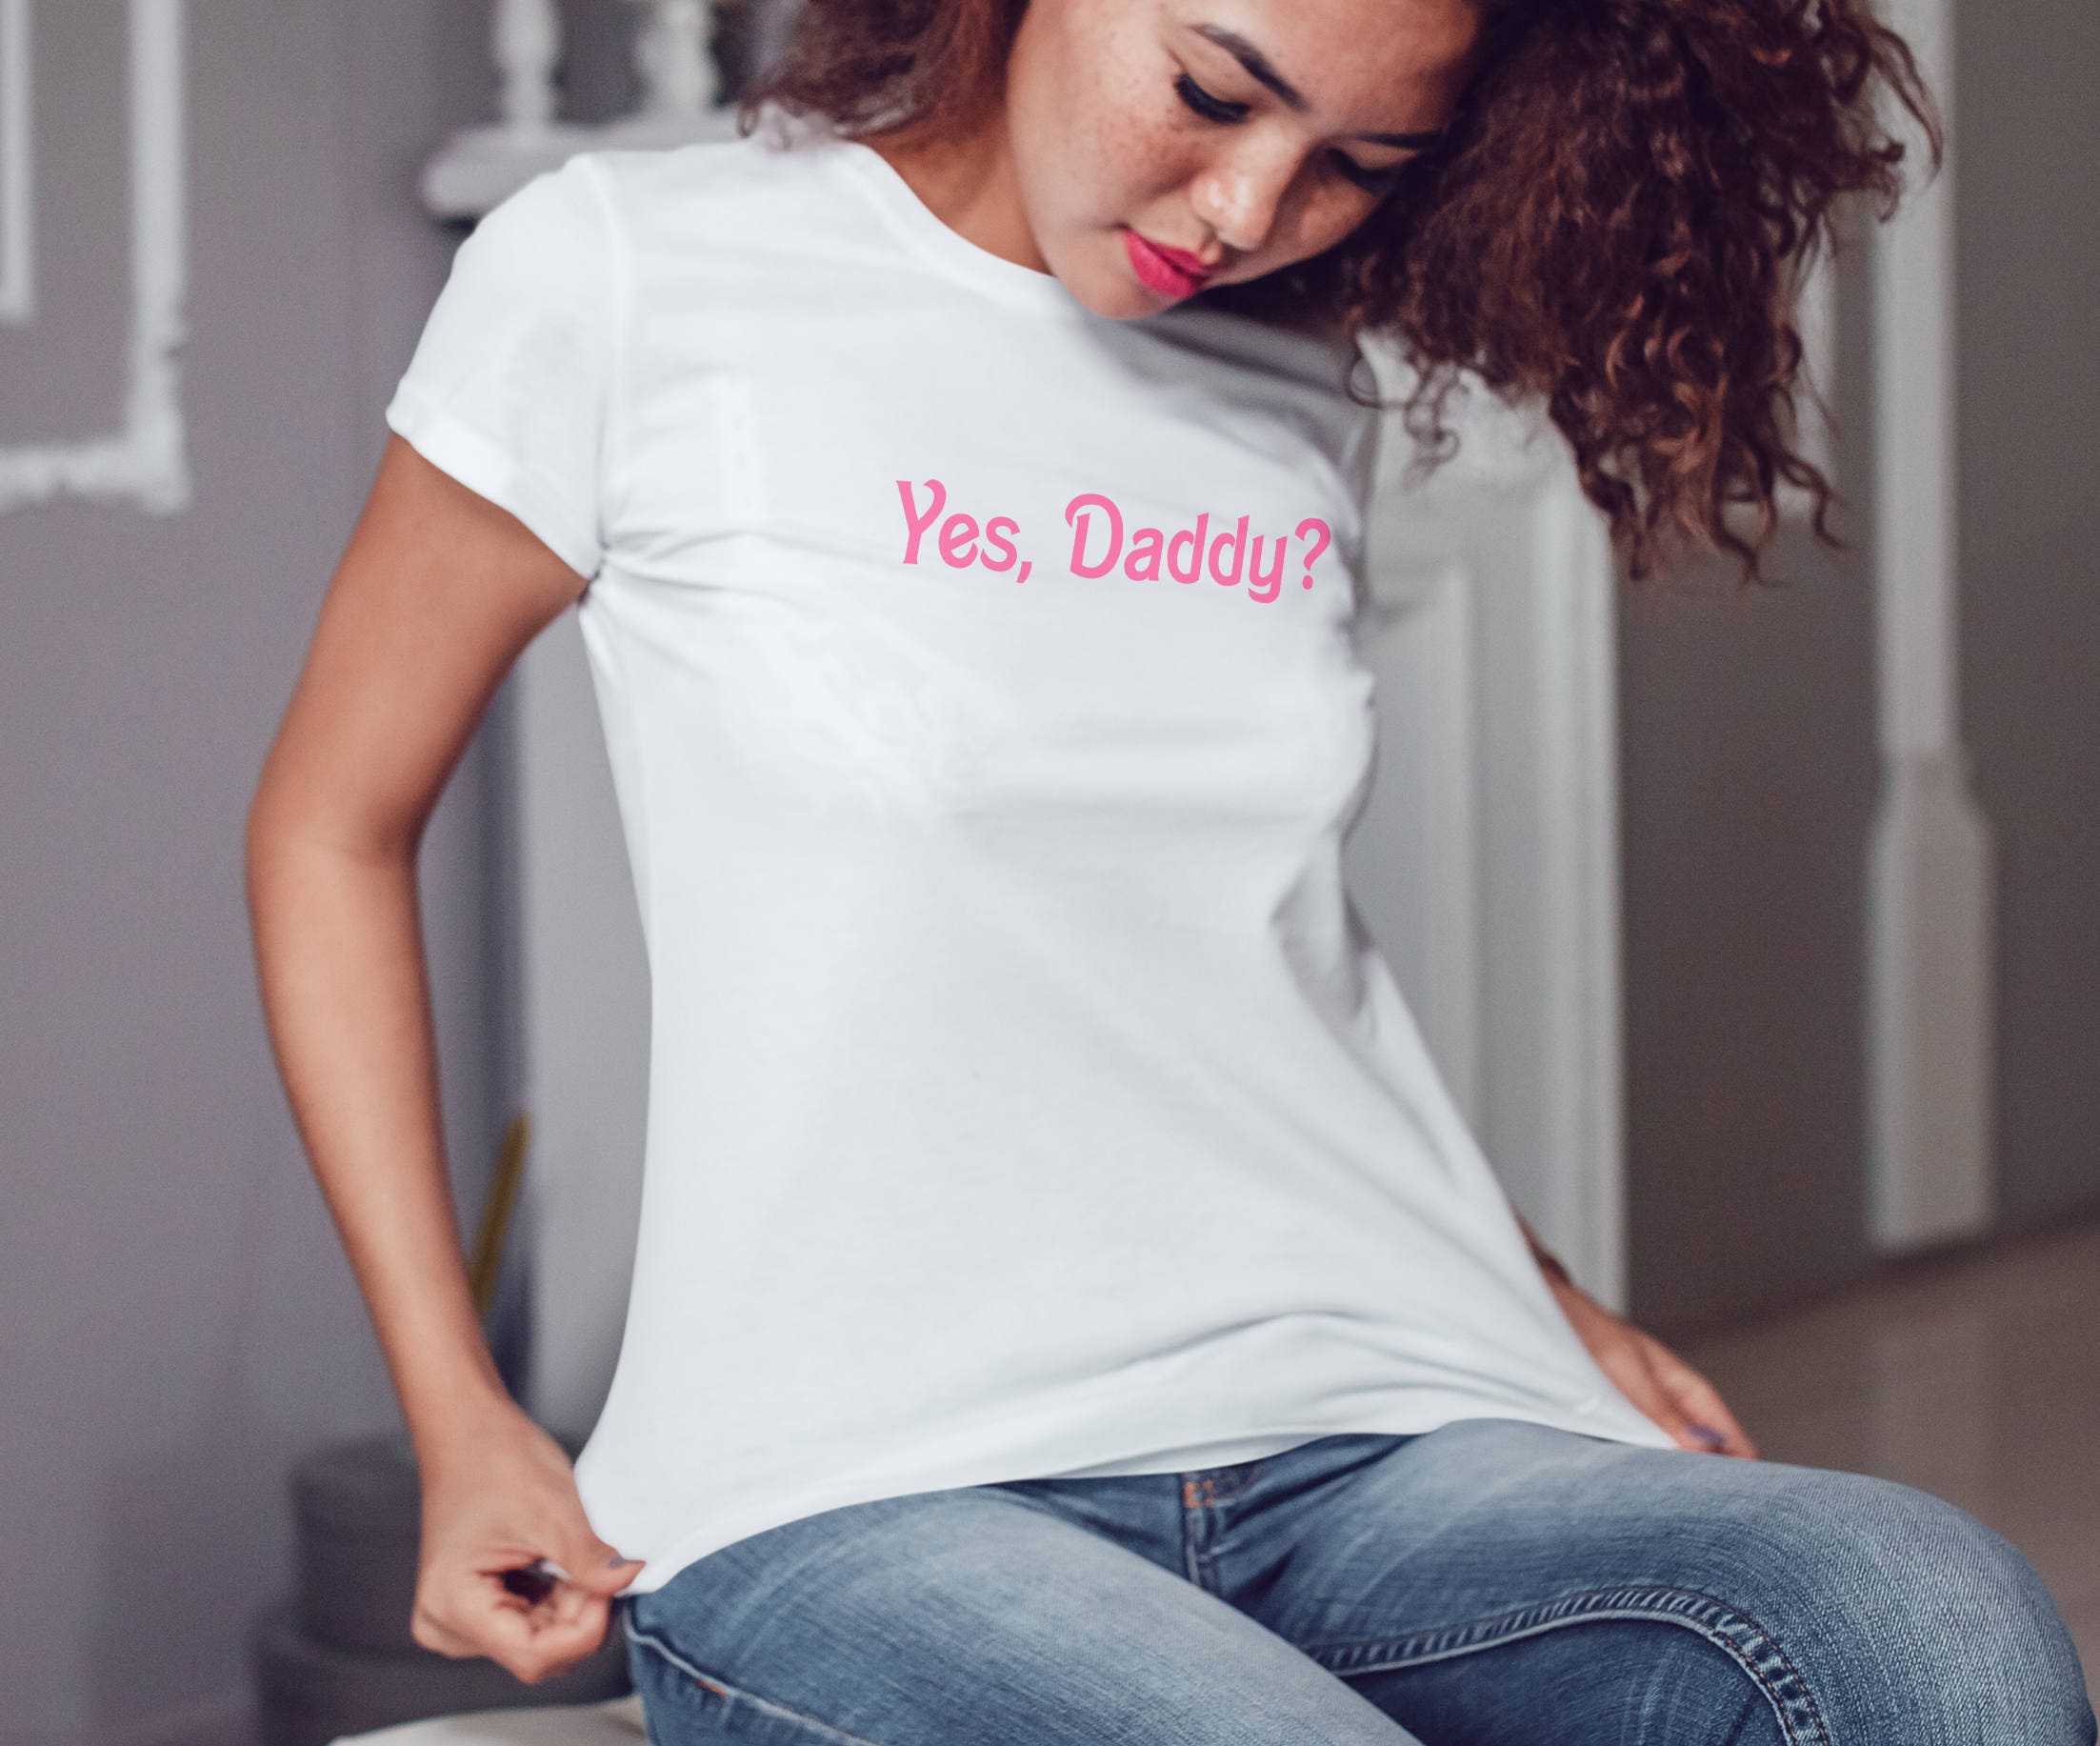 Yes Daddy? Shirt DDLG Clothing Sexy Cute Funny Submissive Naughty Party Gag Gift DDLG Womens Tee Shirt